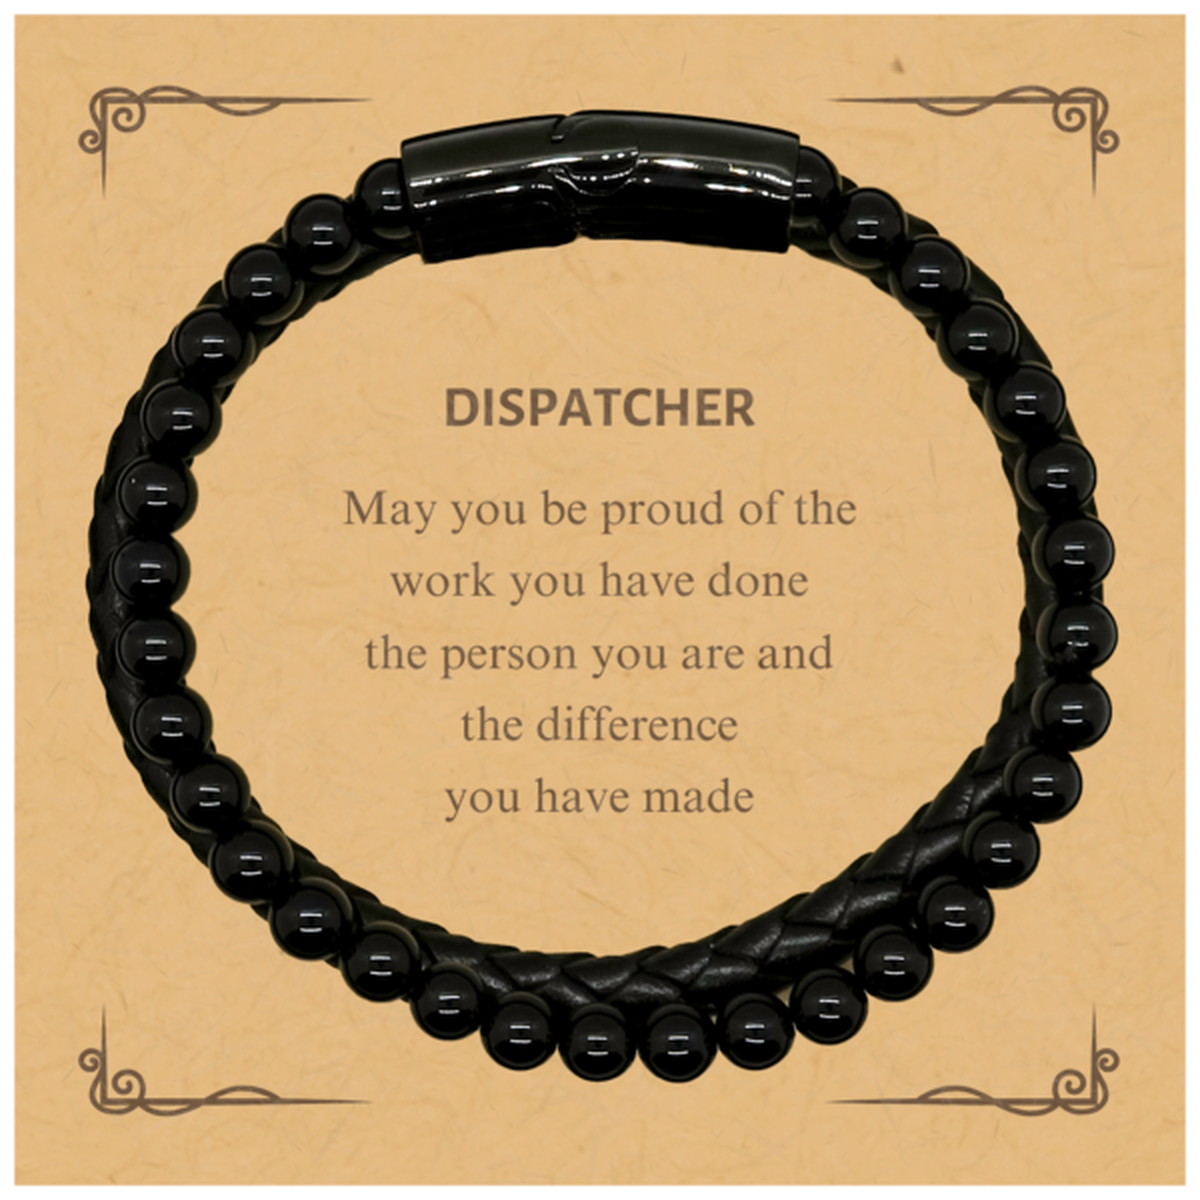 Dispatcher May you be proud of the work you have done, Retirement Dispatcher Stone Leather Bracelets for Colleague Appreciation Gifts Amazing for Dispatcher